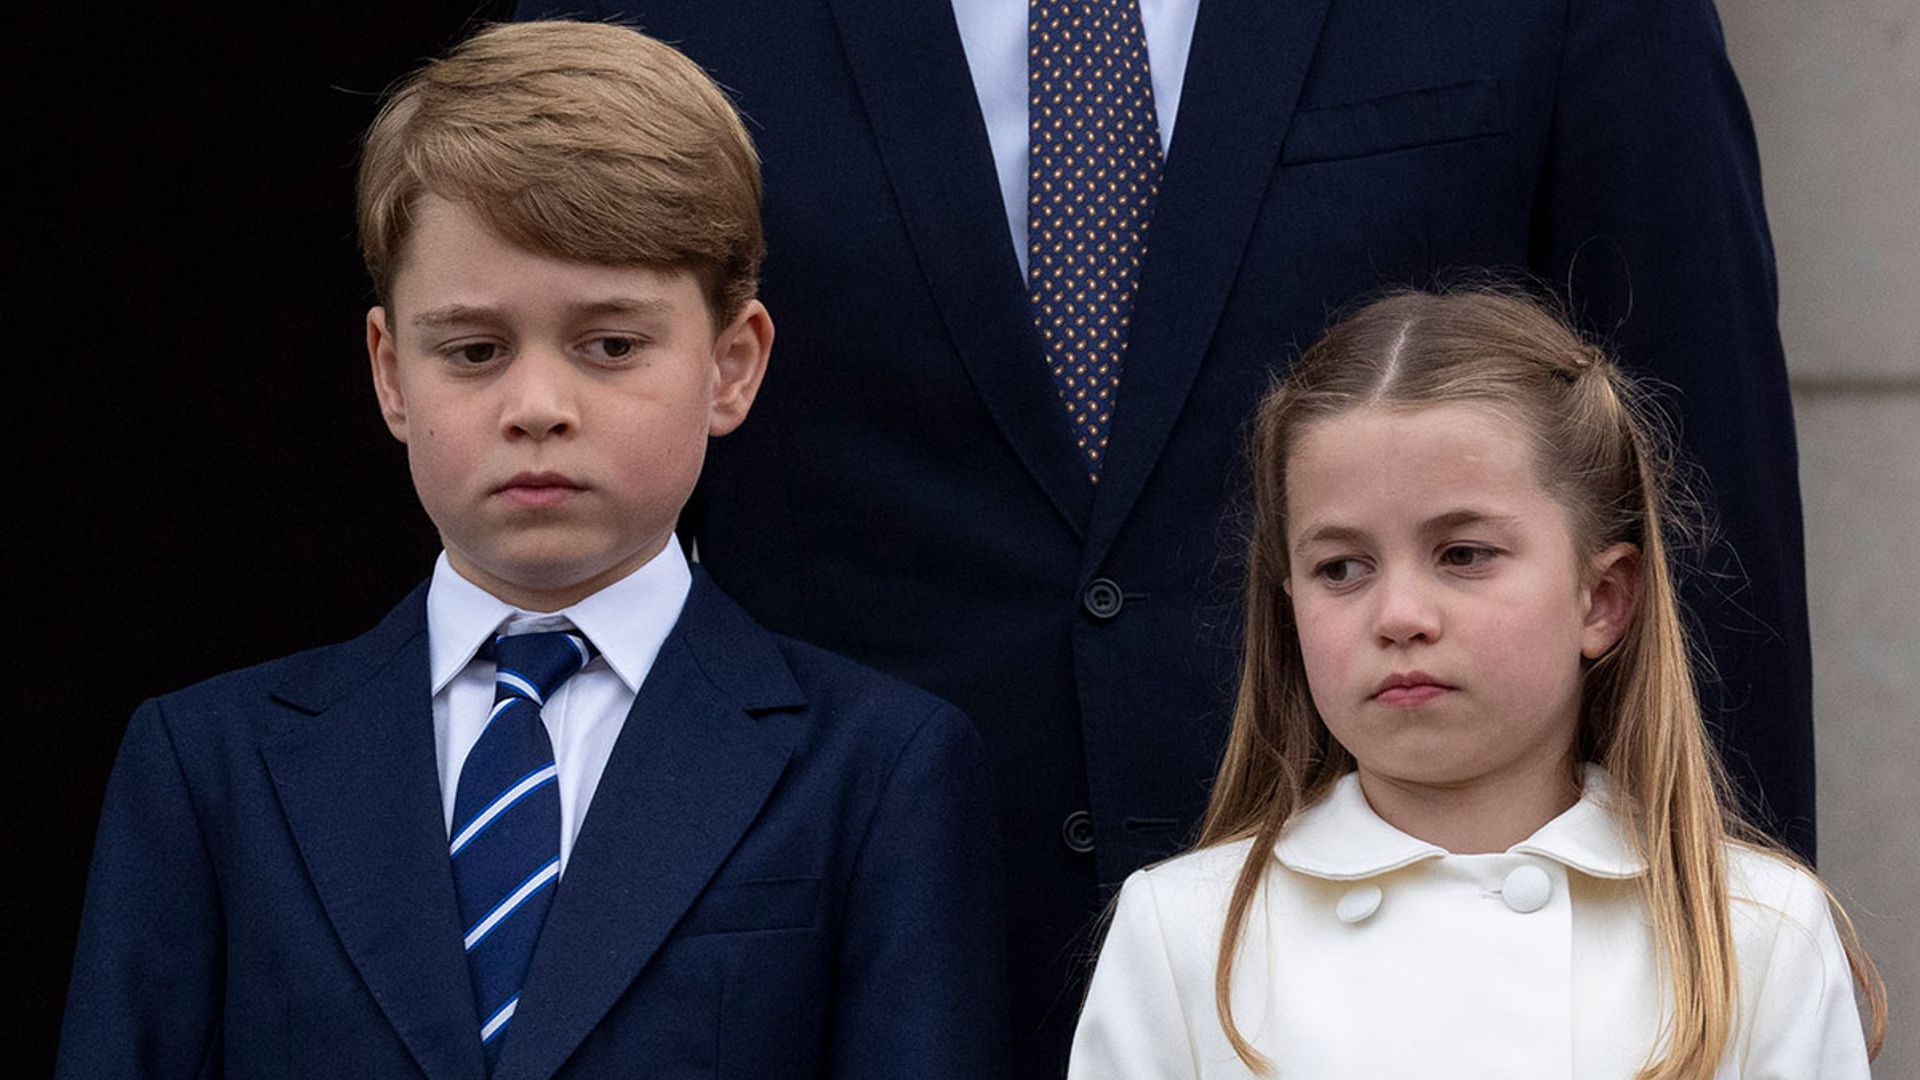 Princess Charlotte corrects Prince George's posture during God Save The Queen – WATCH